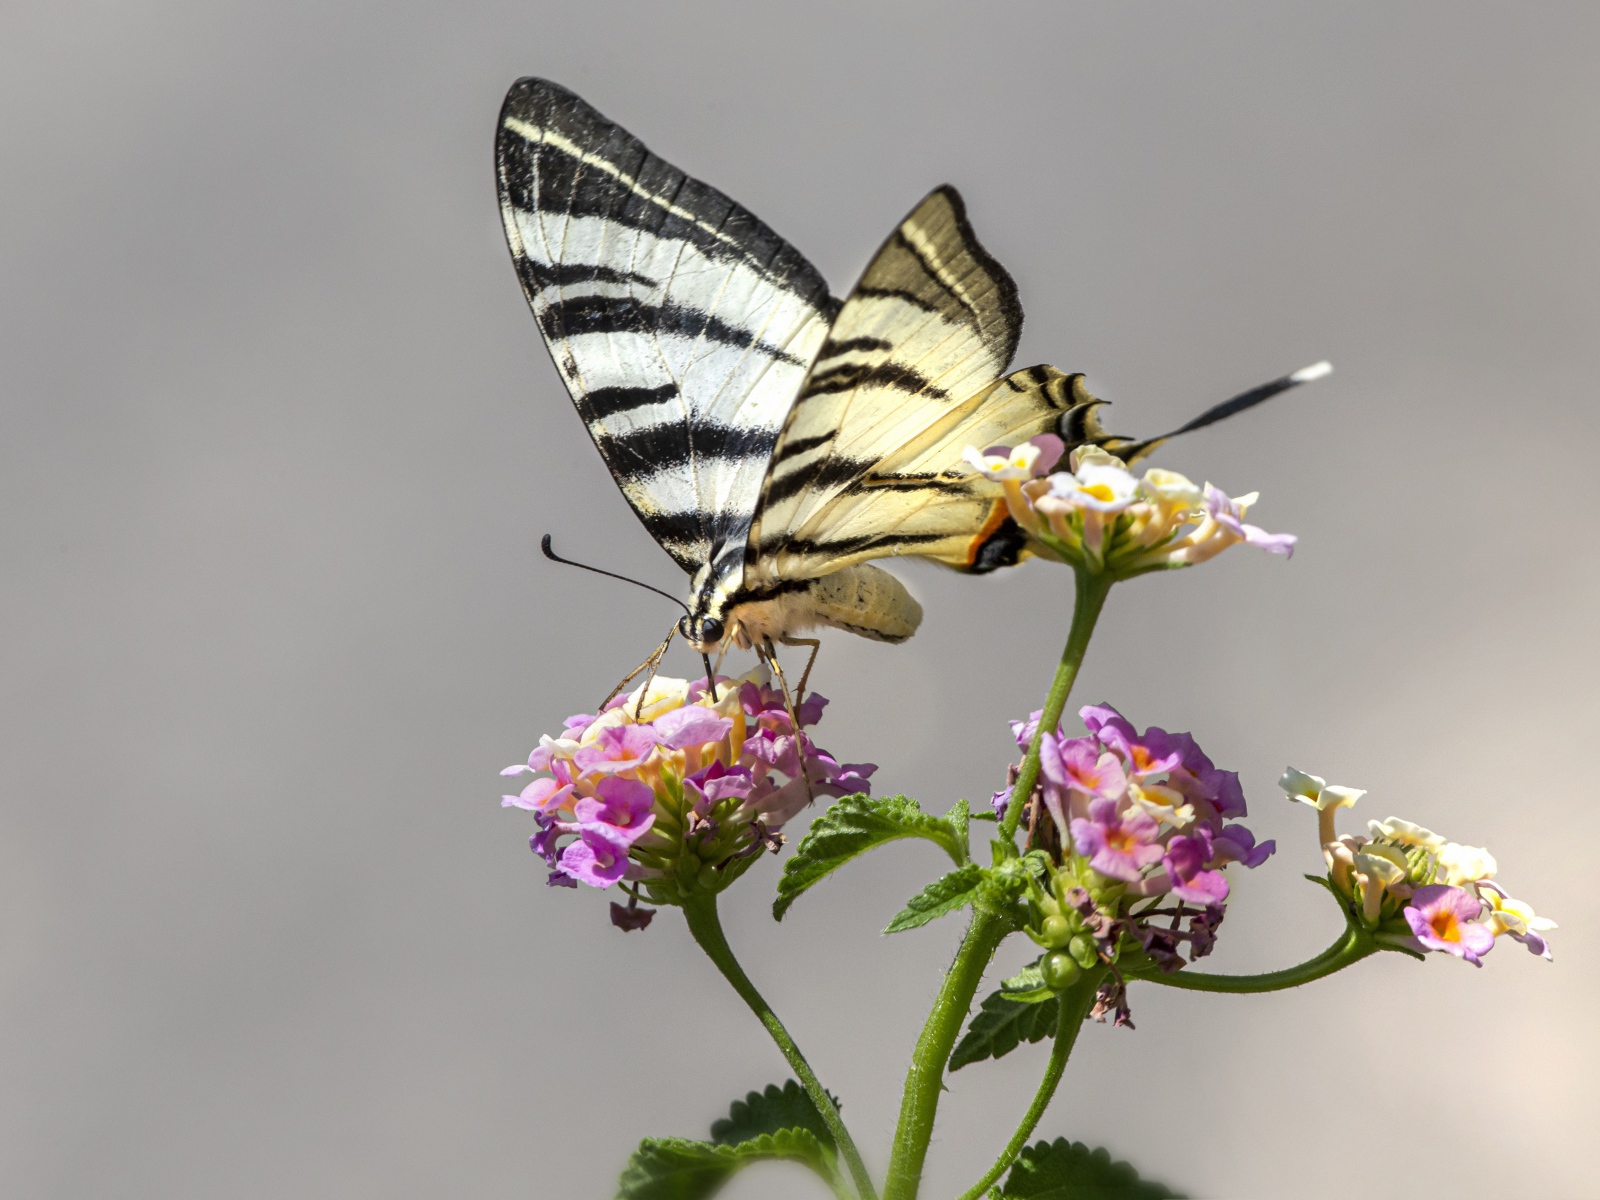 Swallowtail butterfly sits on a flower on a gray background